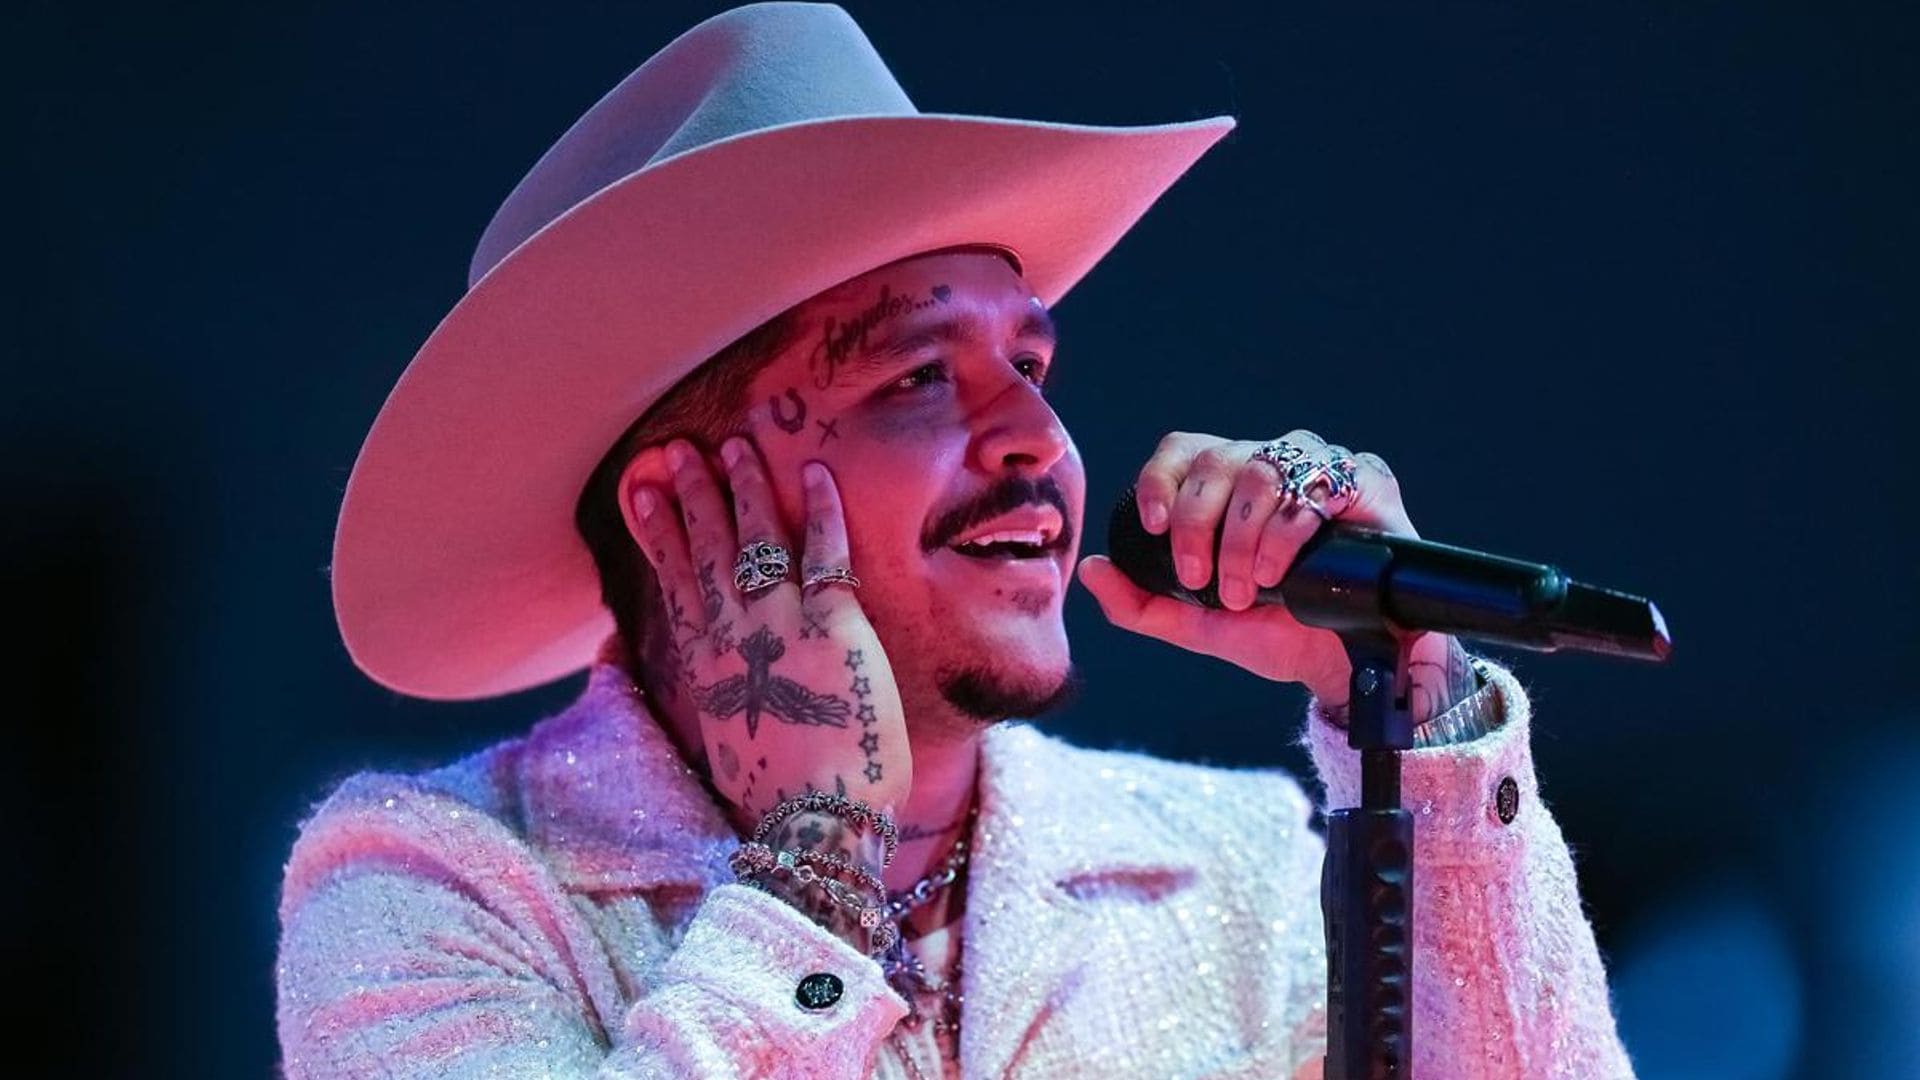 Christian Nodal shocks fans with new photos showing no face tattoos